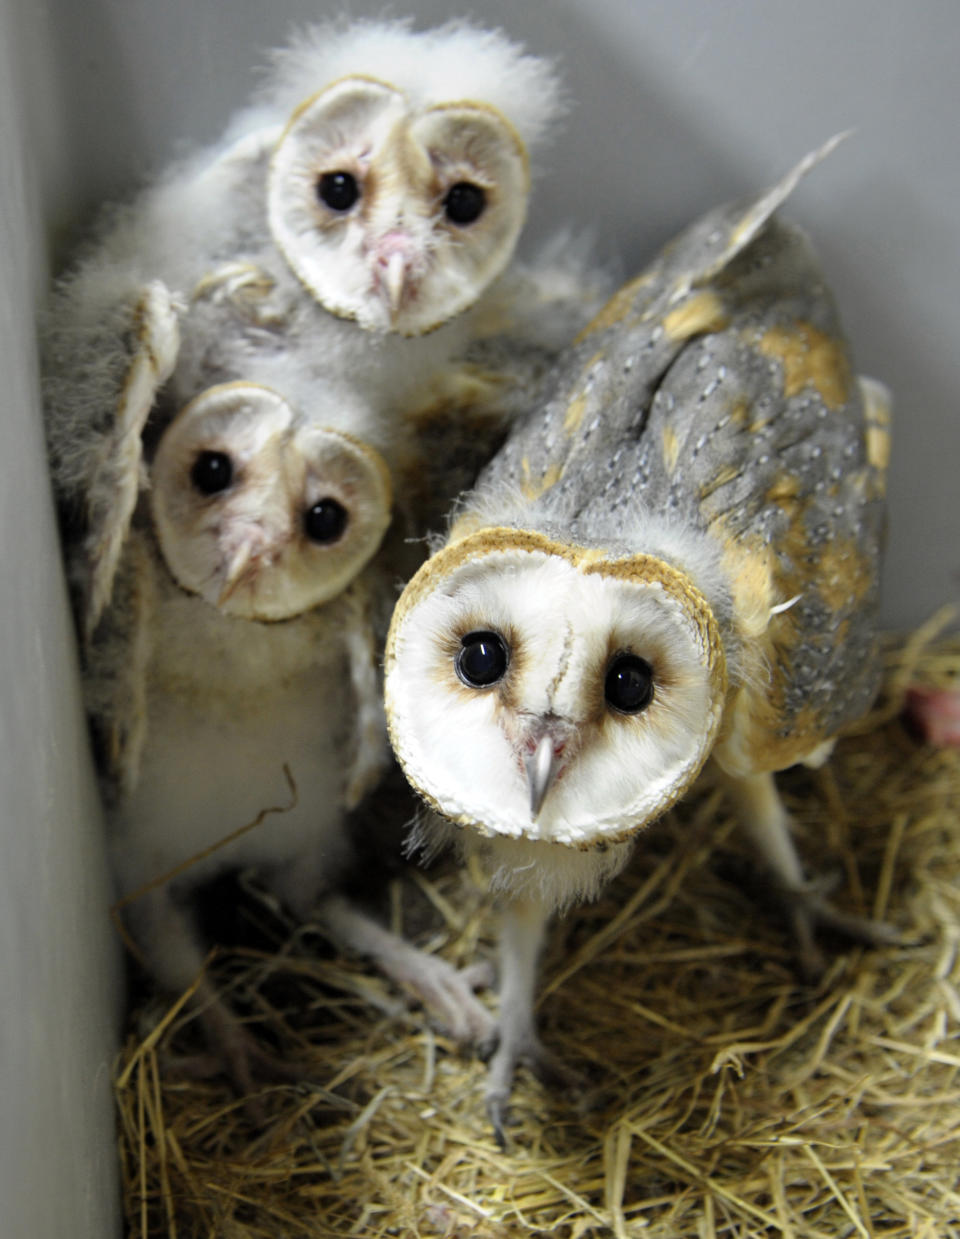 Barn owl chicks are pictured at the zoo in Amneville, France, on July 8, 2013.